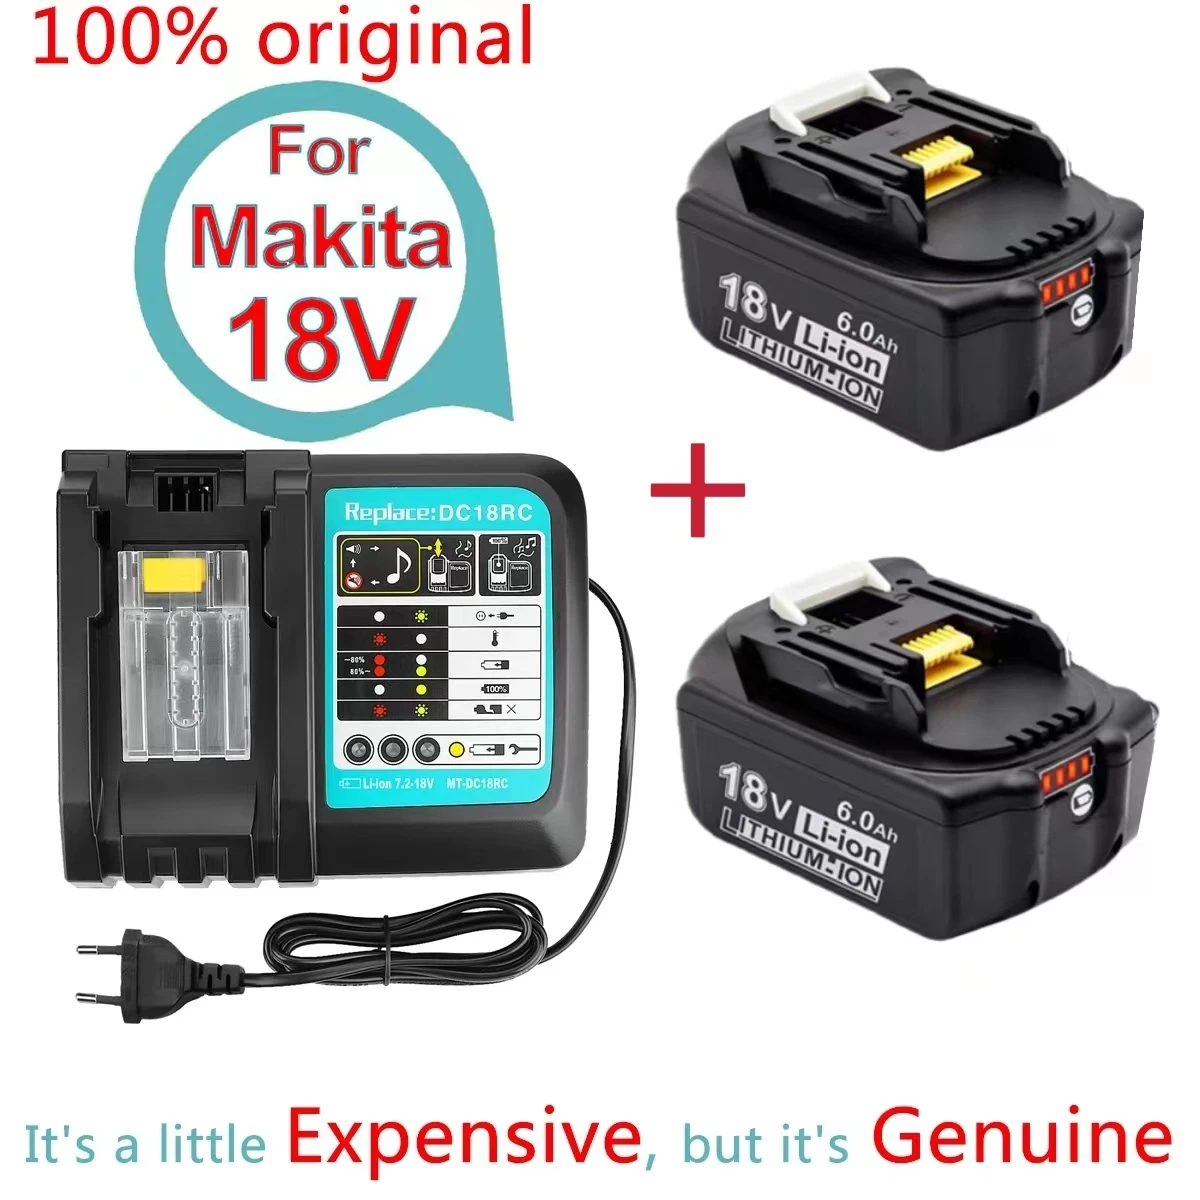 

100% original Makita 18v battery rechargeable power tool battery,with LED lithium ion substitute LXTBL1860B BL1860 BL1850 BL1830